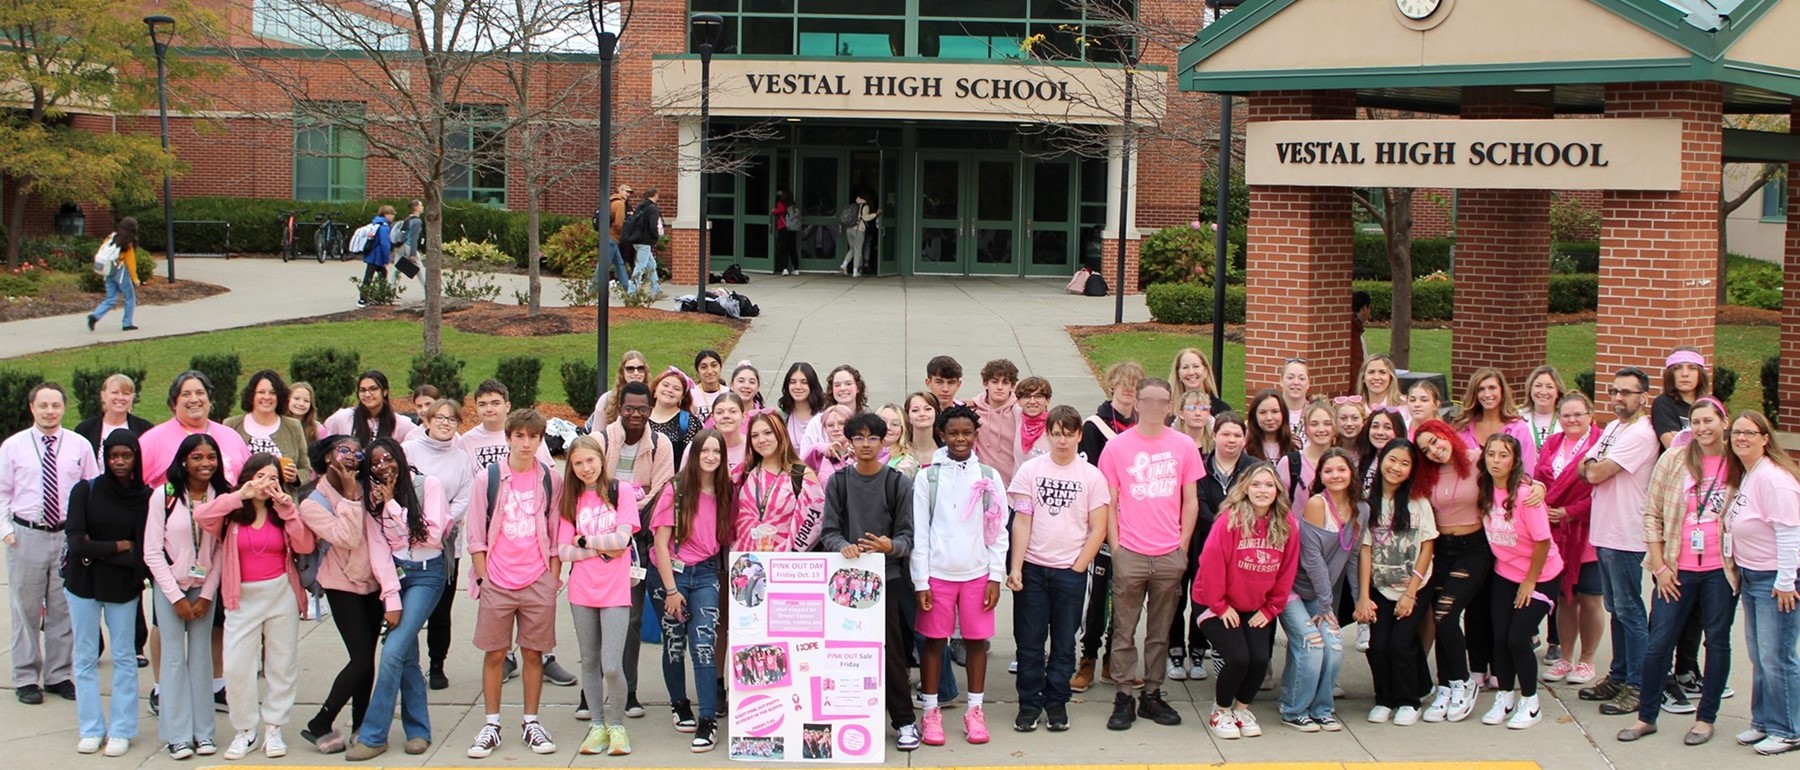 Students dressed in pink stand in front of Vestal High School for the All-Out Pink-Out Day in solidarity with breast cancer survivors.